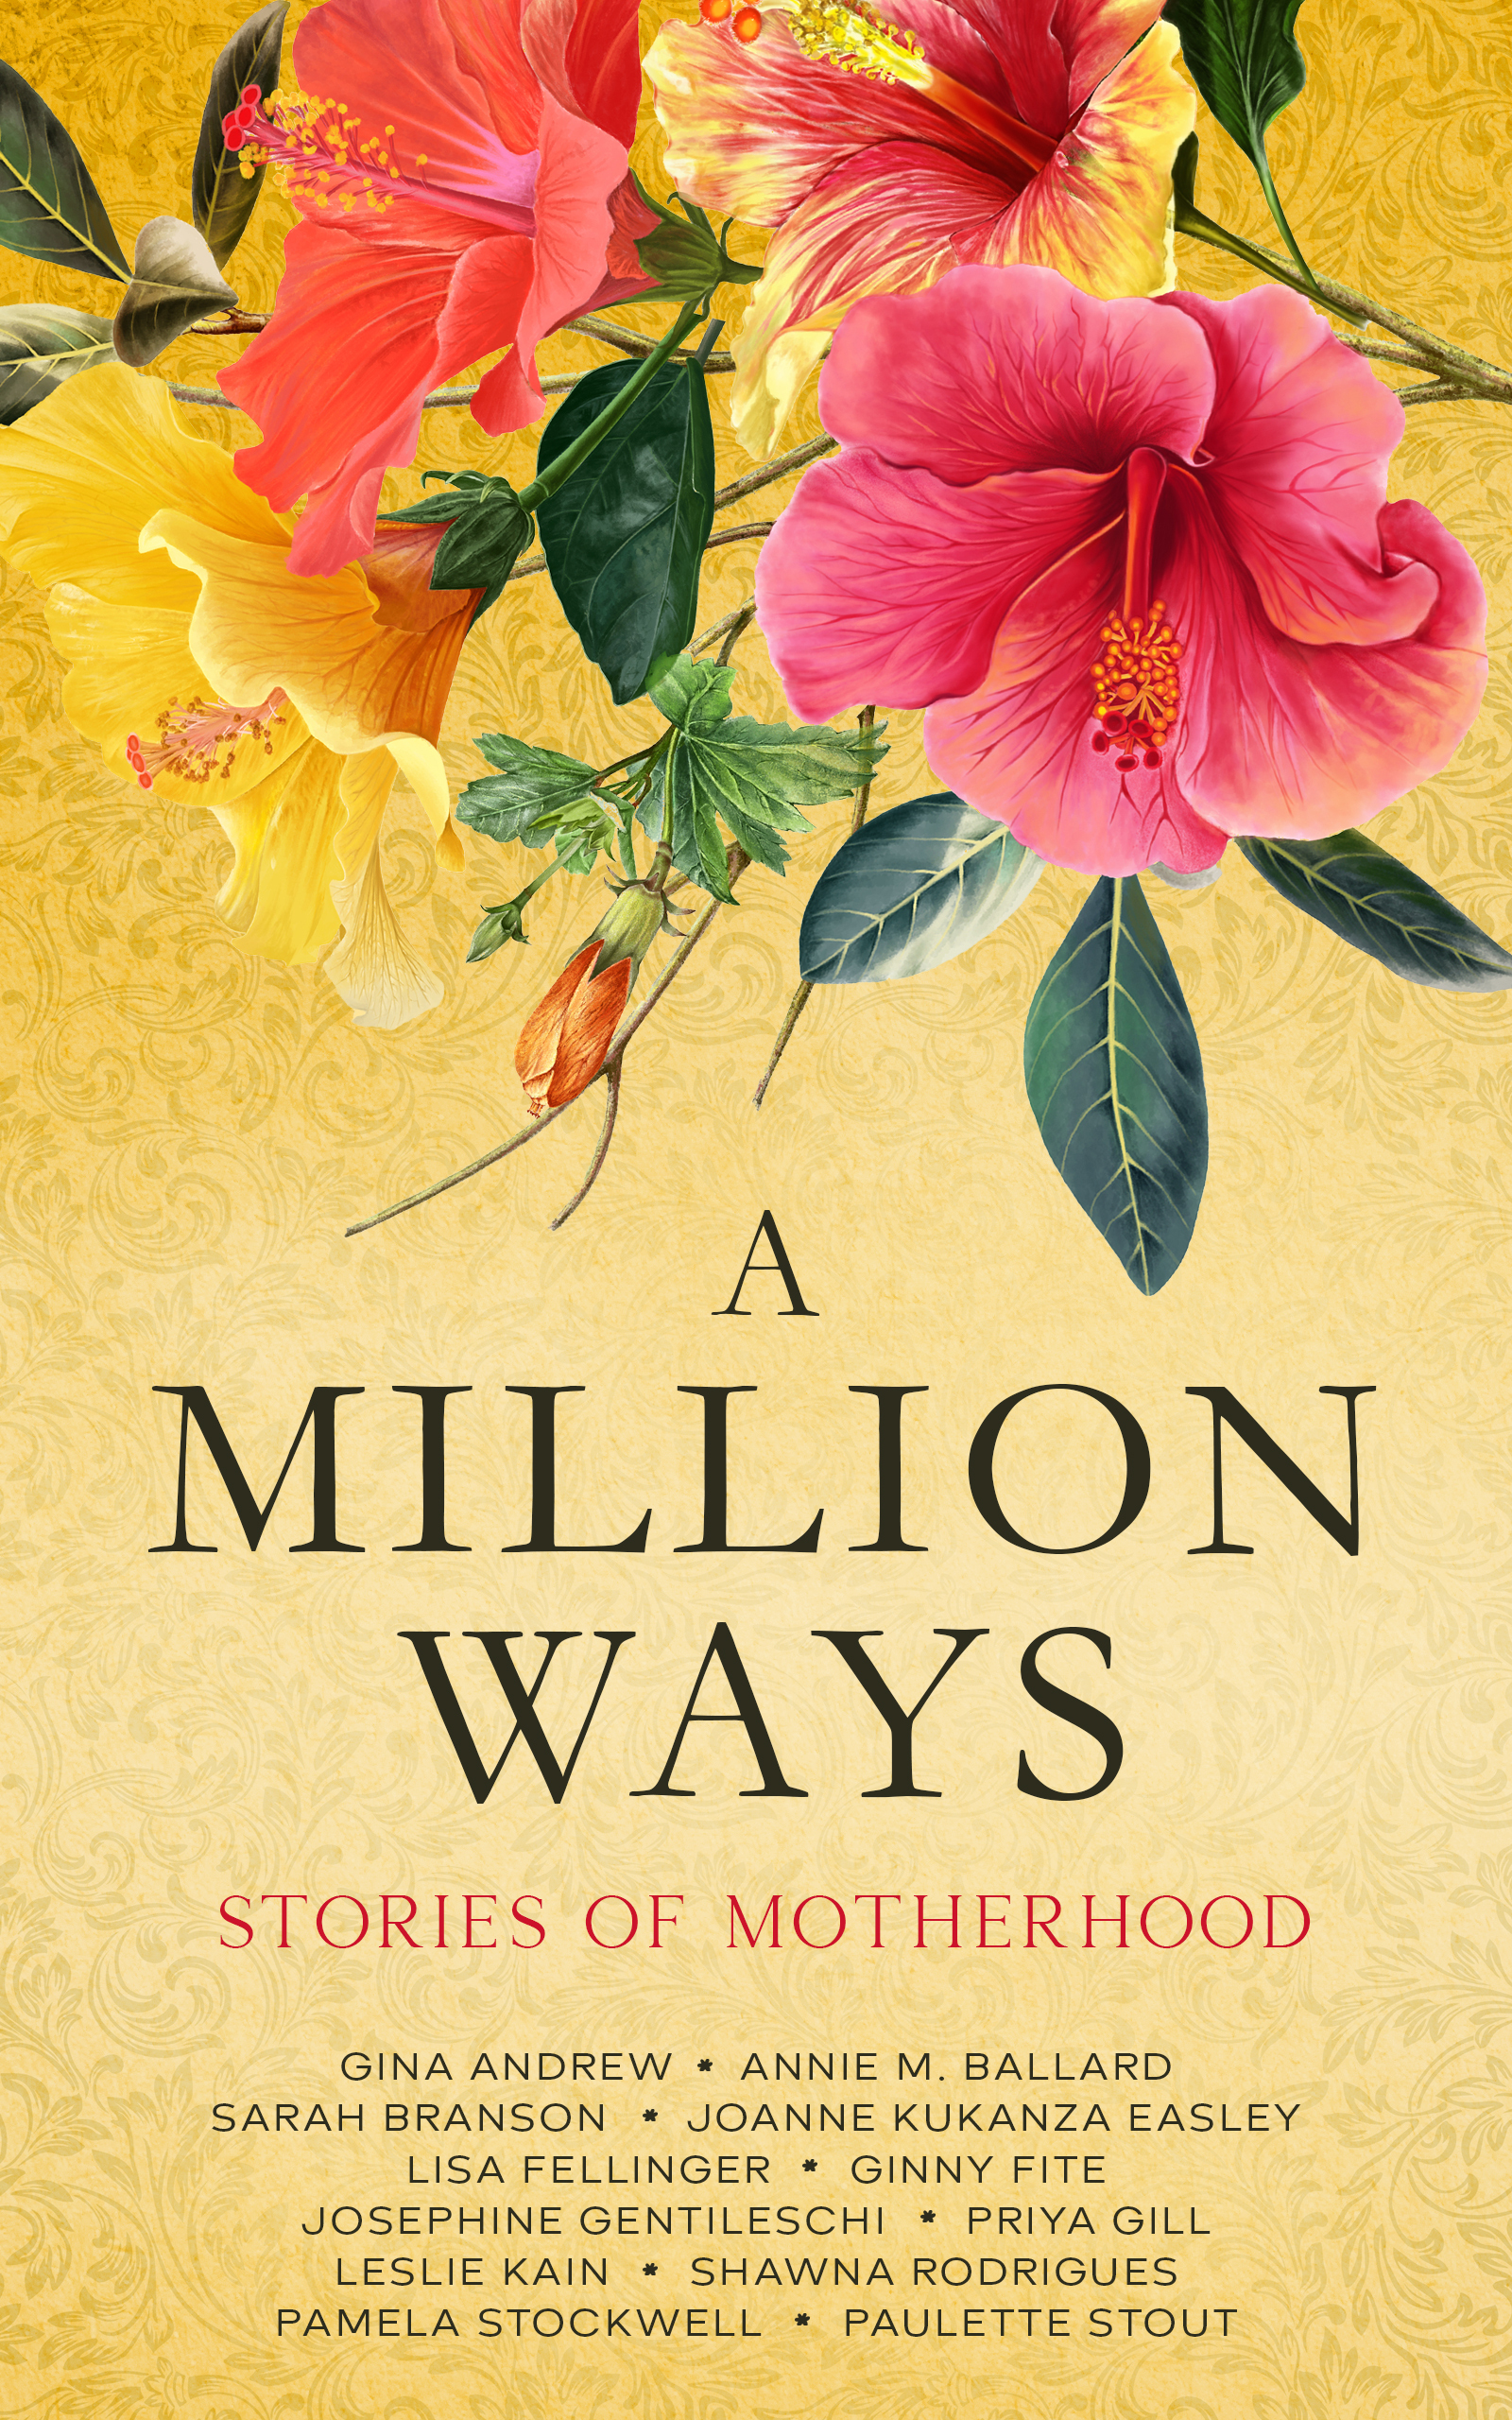 A Million Ways: Stories of Motherhood by Gina Andrew